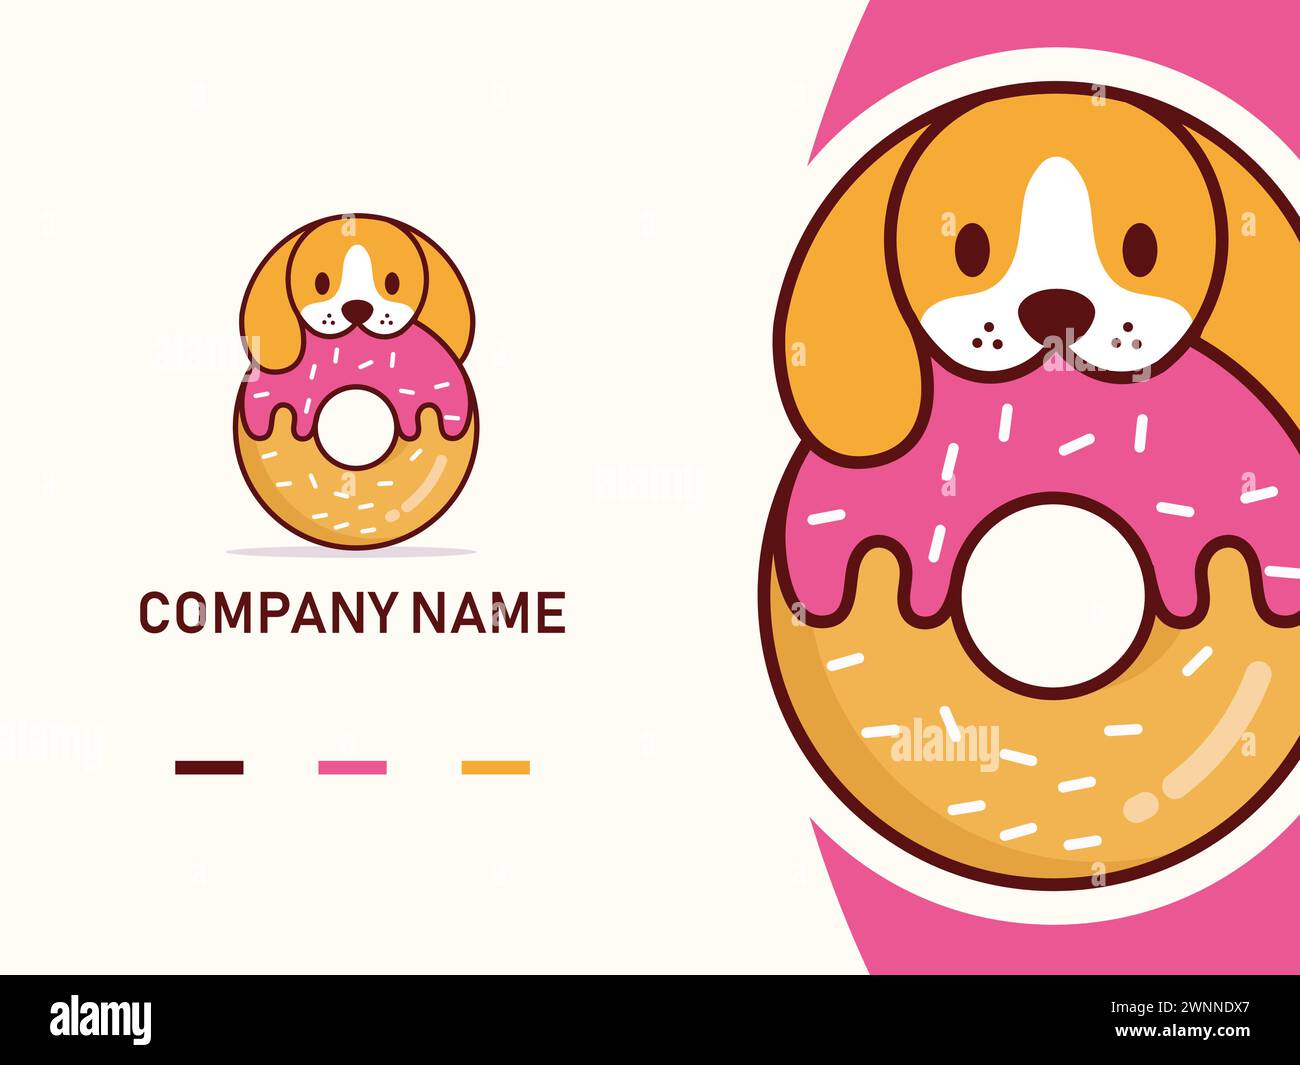 A mascot illustration and logo design for donut shop, bakery or pet shop. Fully customizable organized layer vector file, that can be used as a brad i Stock Vector